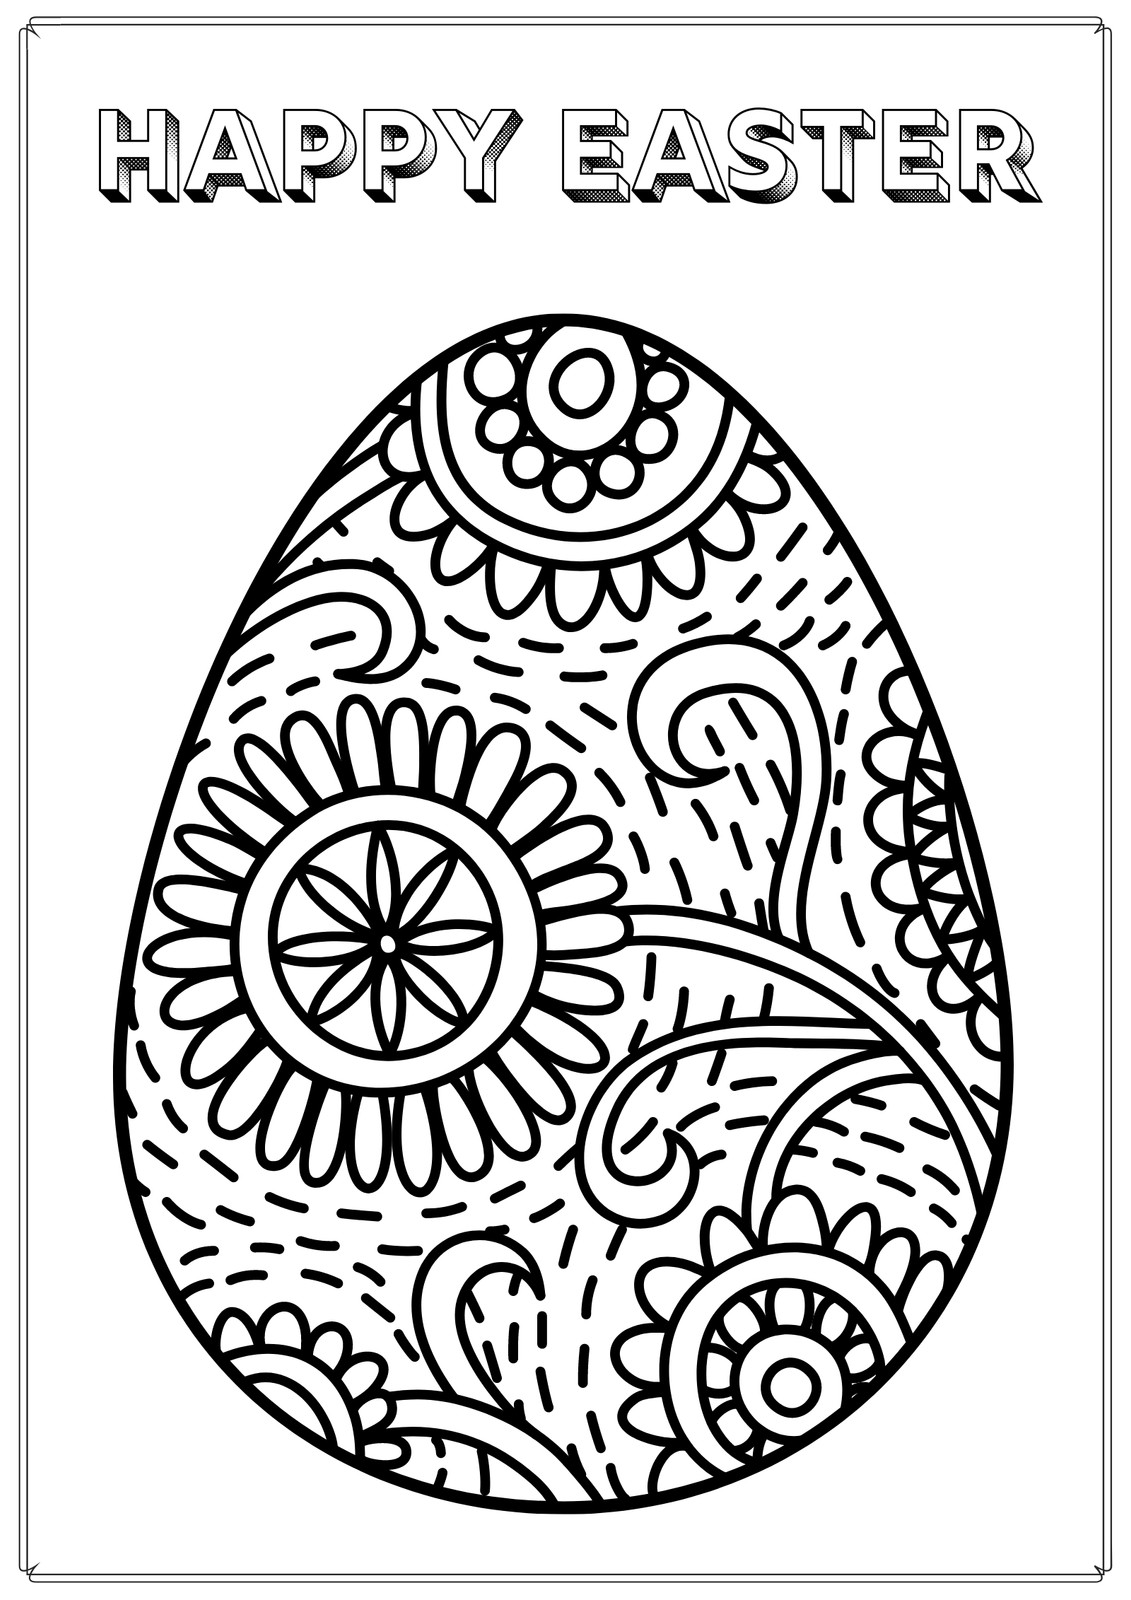 Free and customizable coloring templates